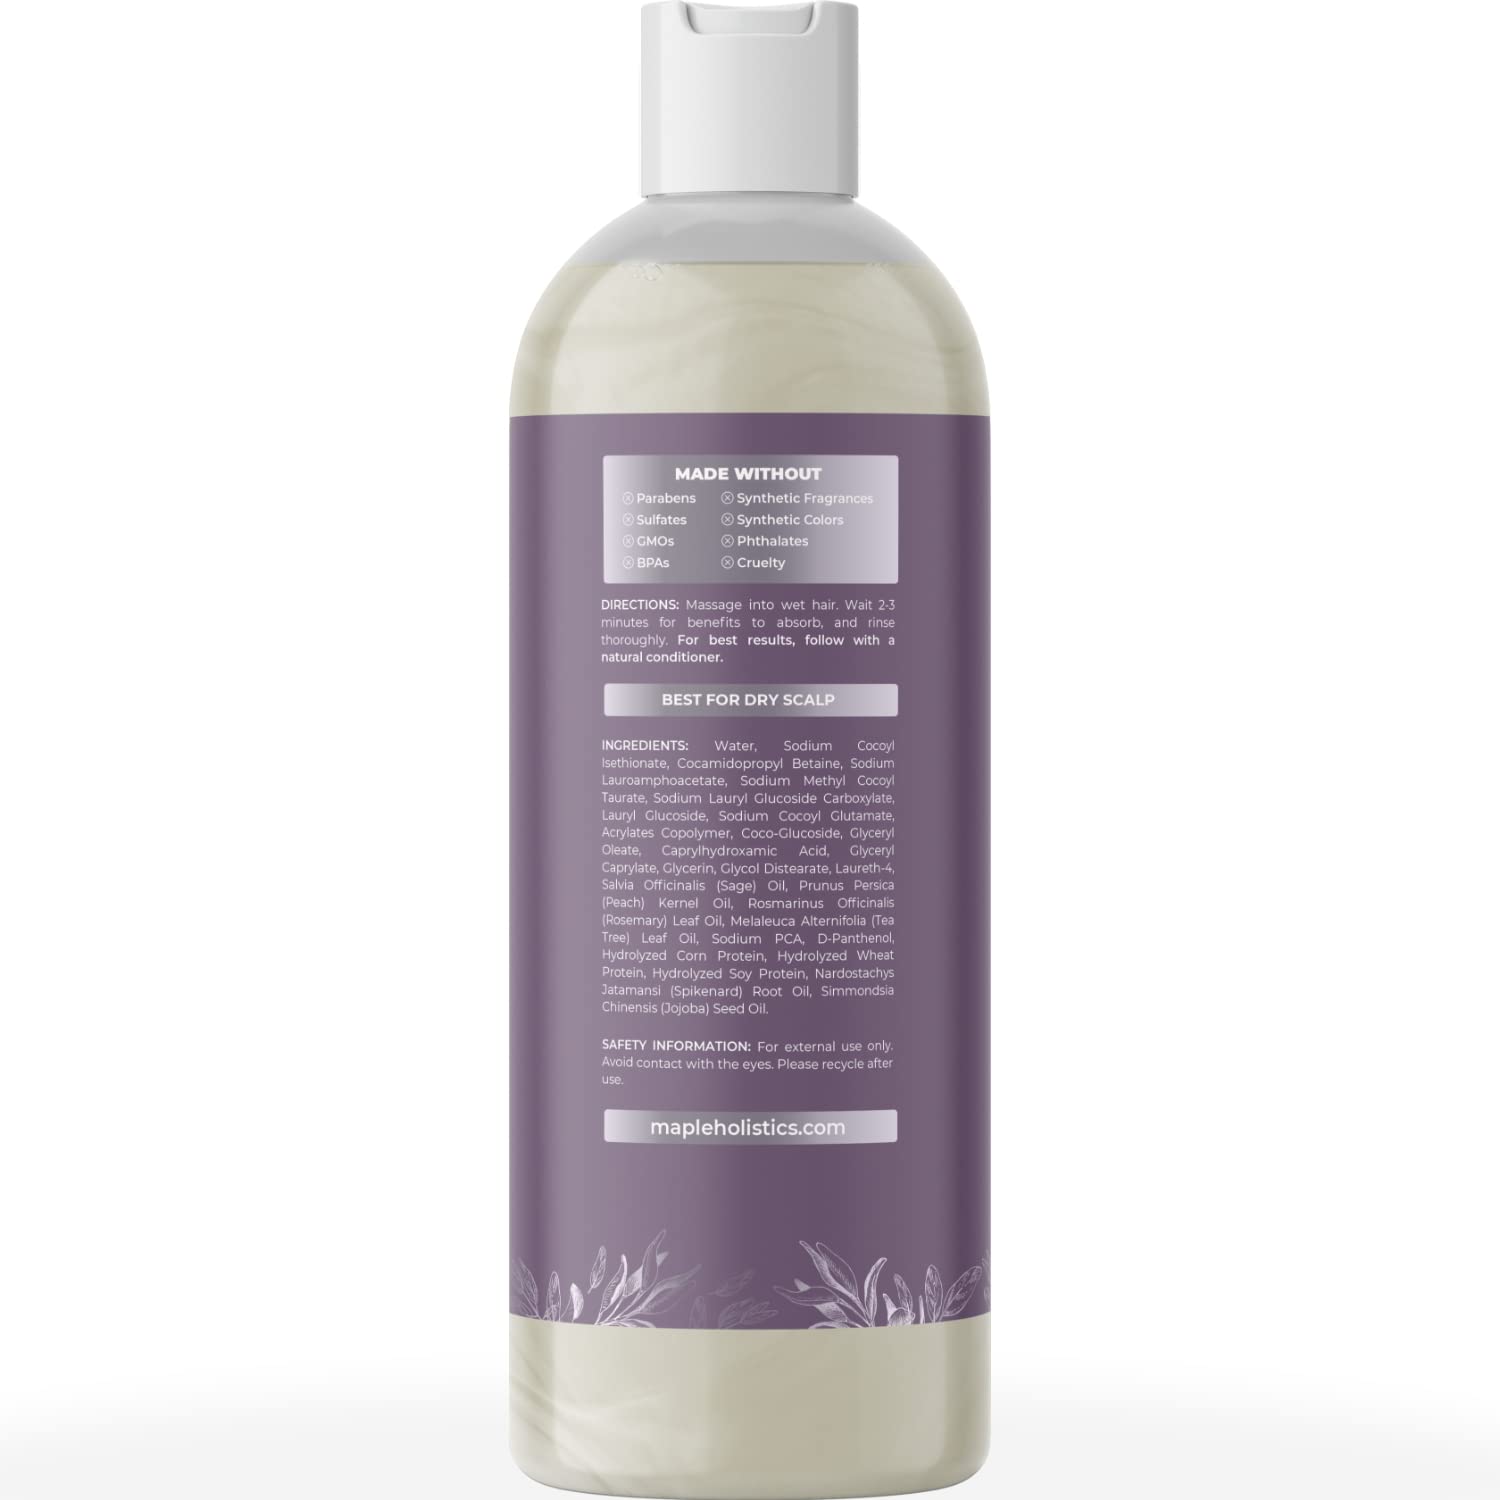 Clarifying Shampoo for Oily Hair and Scalp - Sulfate Free Shampoo with Rosemary Oil Sage and Tea Tree Oil for Hair and Scalp Cleanser - Dry Scalp Shampoo for Men and Women, 8 fl oz - image 2 of 7